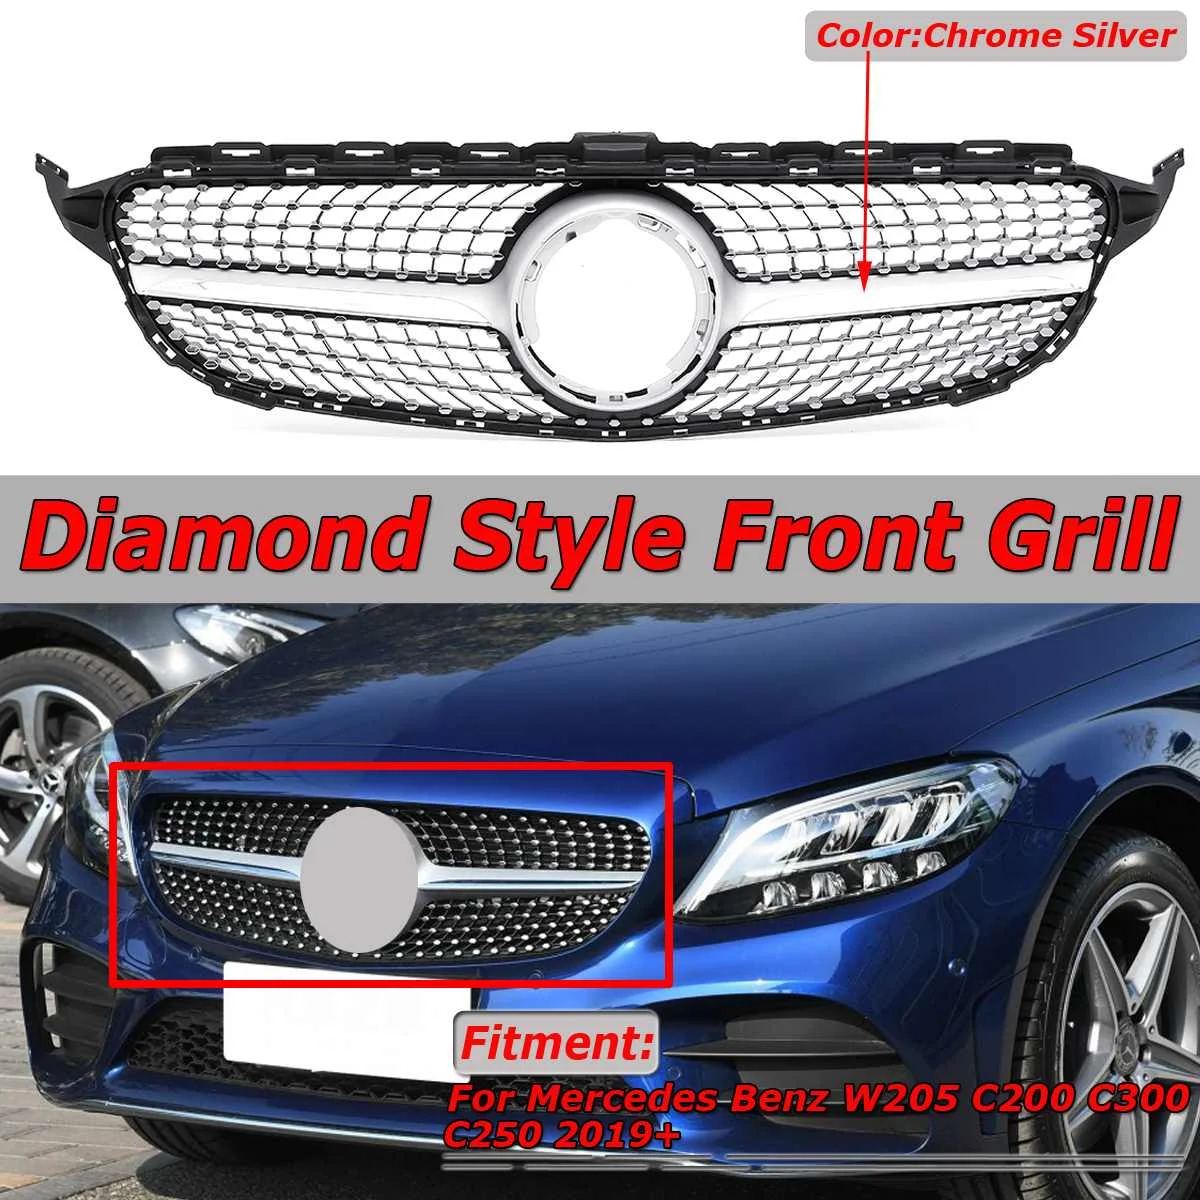 New W205 Diamond Grille Diamond Style Car Front Bumper Grille Grill Mesh For Mercedes For Benz C Class W205 C200 C300 C250 2019+